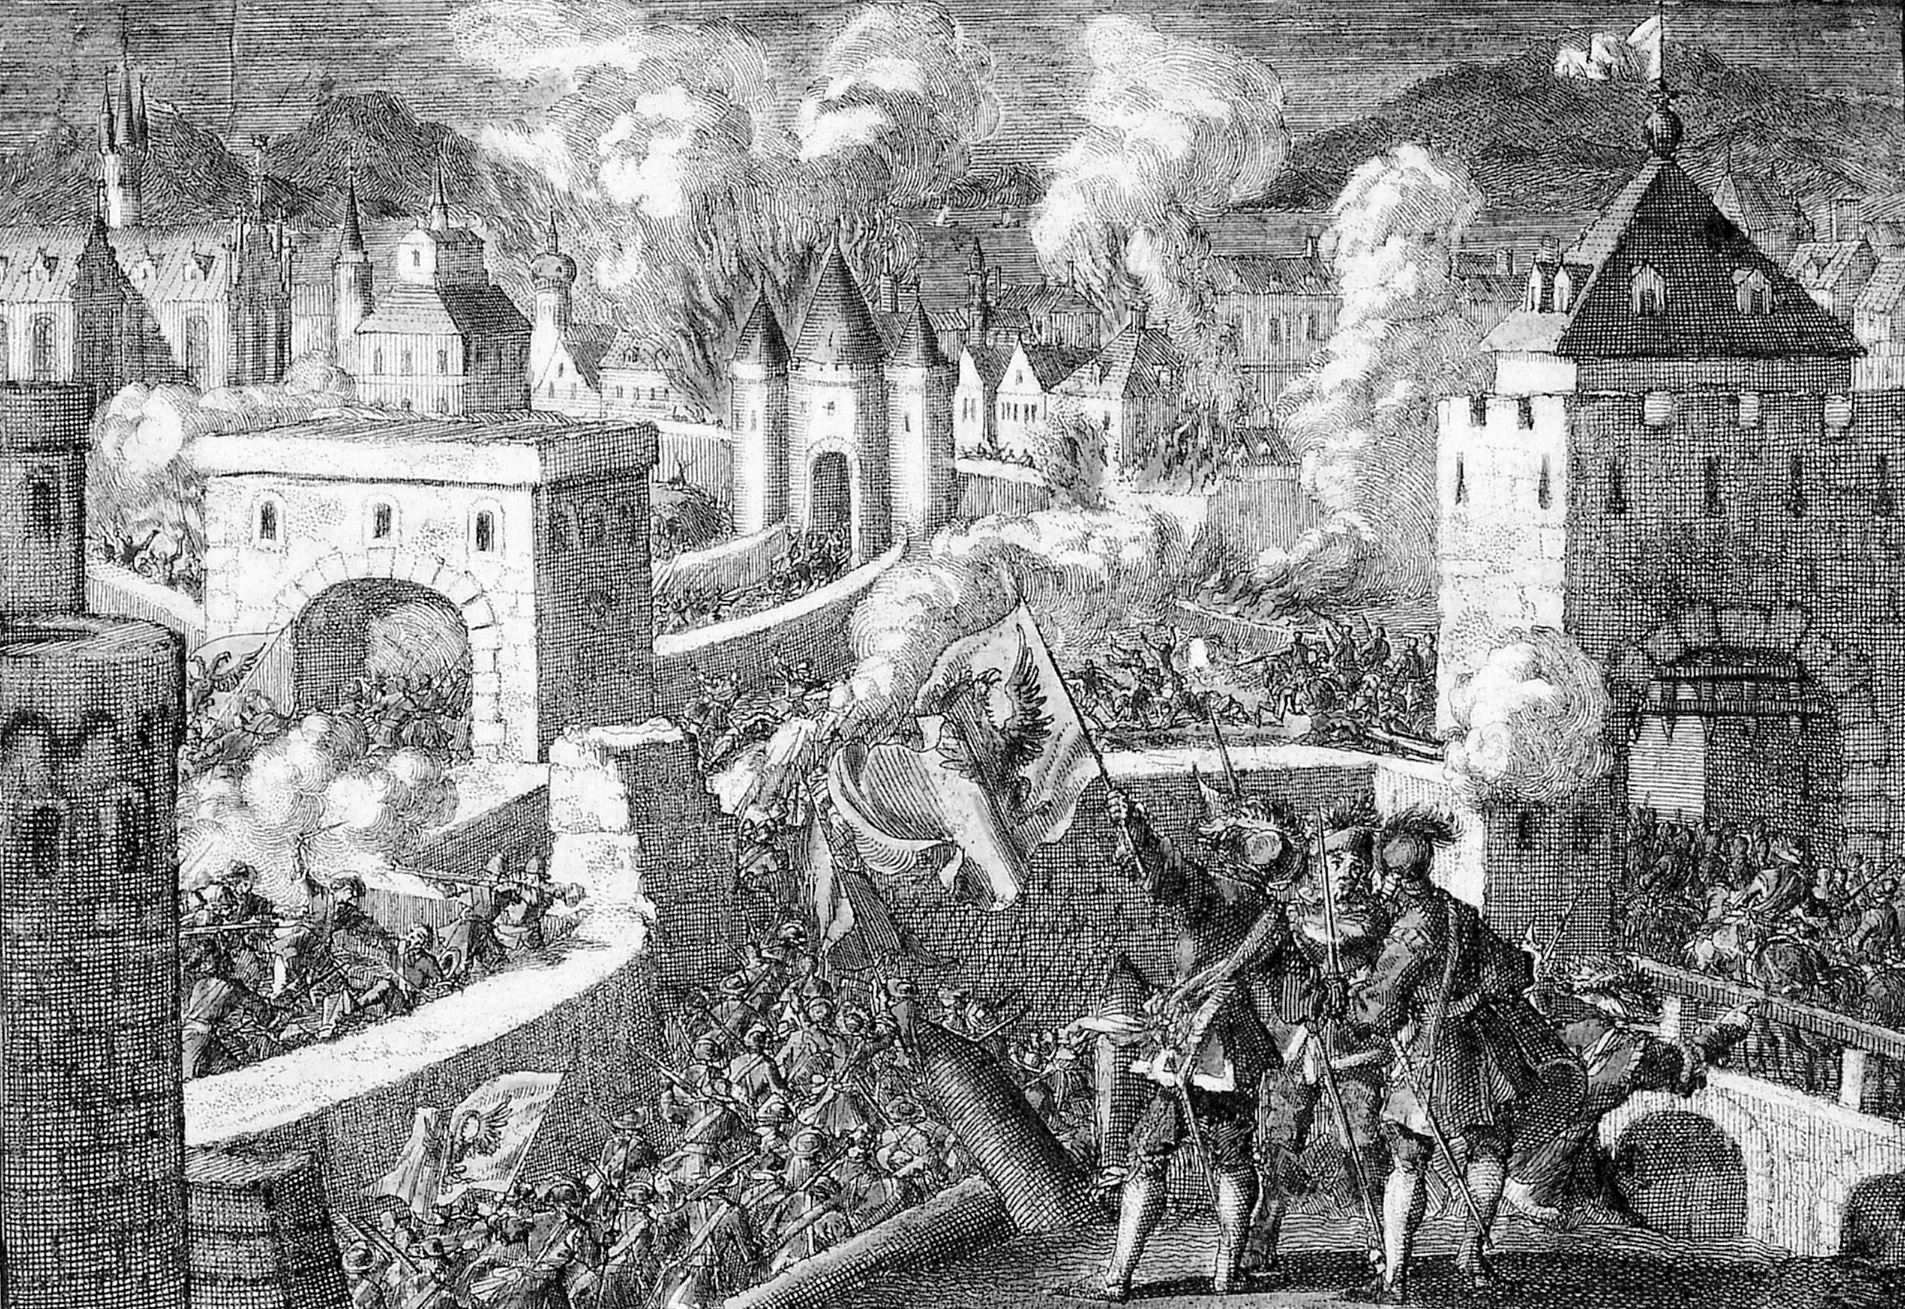 Imperialist forces of the Holy Roman Emperor sacked the city of Magdeburg four months before the Battle of Breitenfeld.